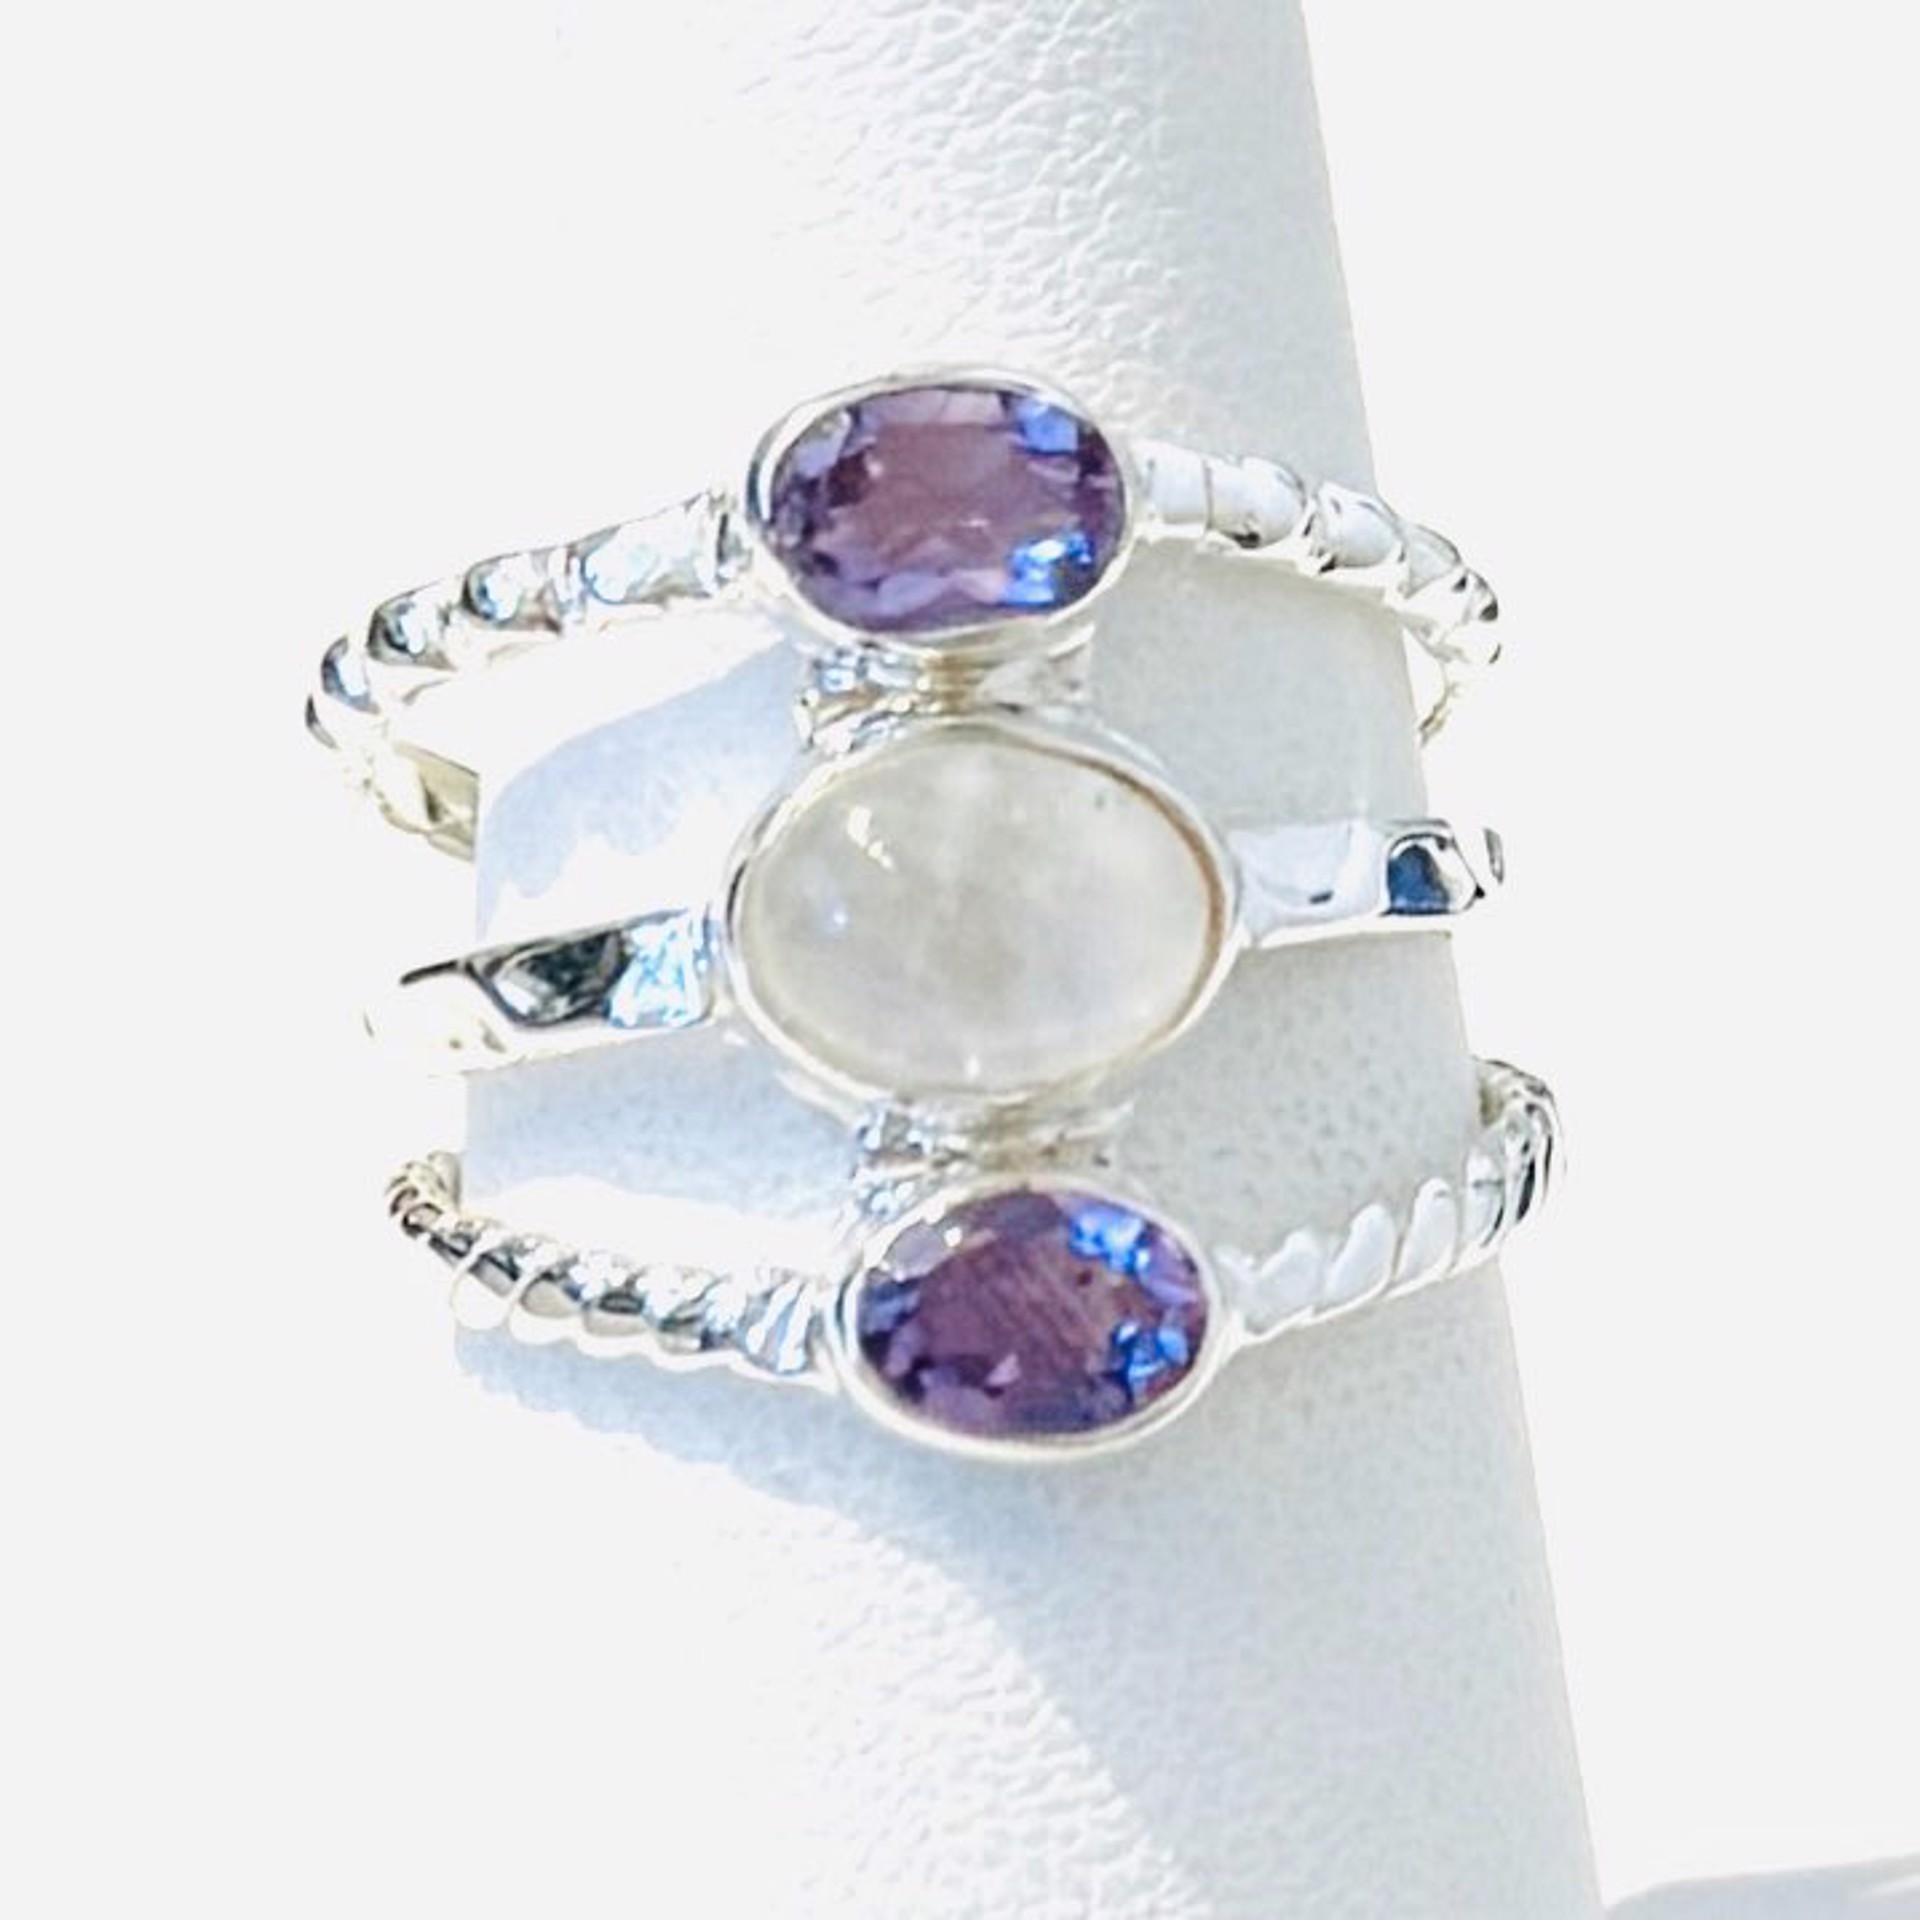 Moonstone with Amethyst MONSR-3271 by Monica Mehta